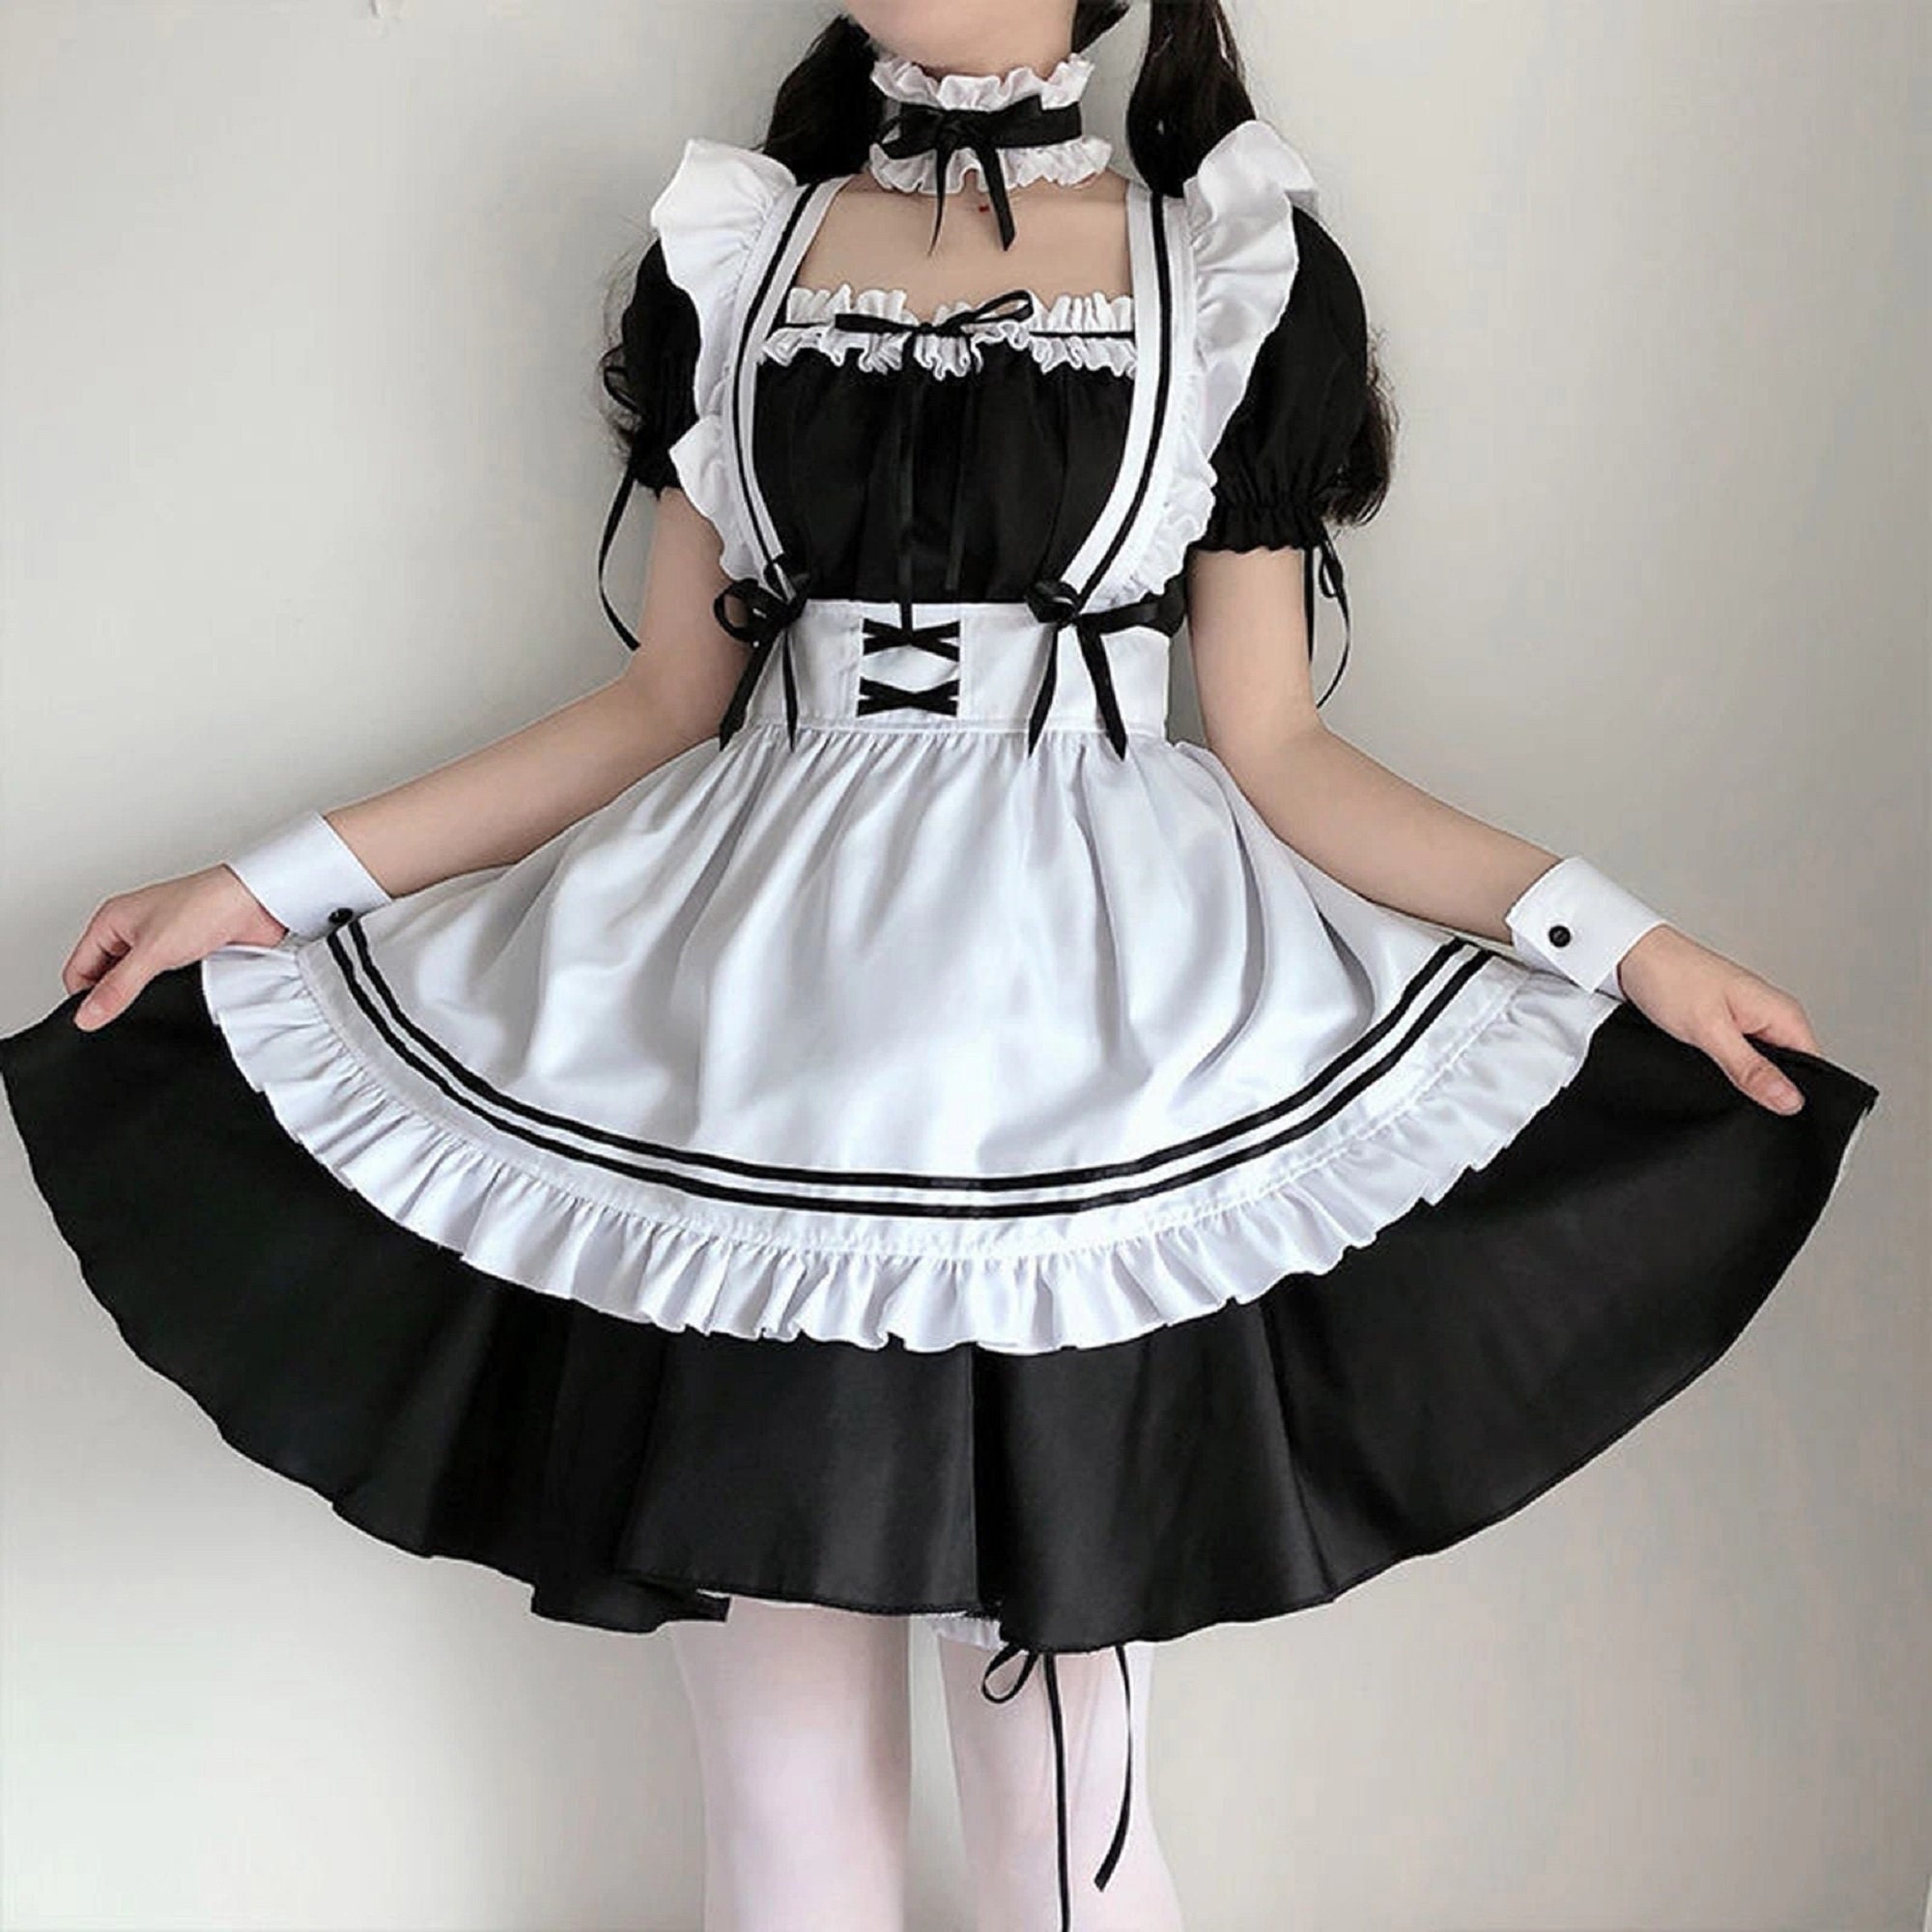 Buy IunongJapanese Anime Sissy Maid Dress Cosplay Sweet Classic Lolita  Fancy Apron Maid Dress with Socks Online at Low Prices in India  Amazonin